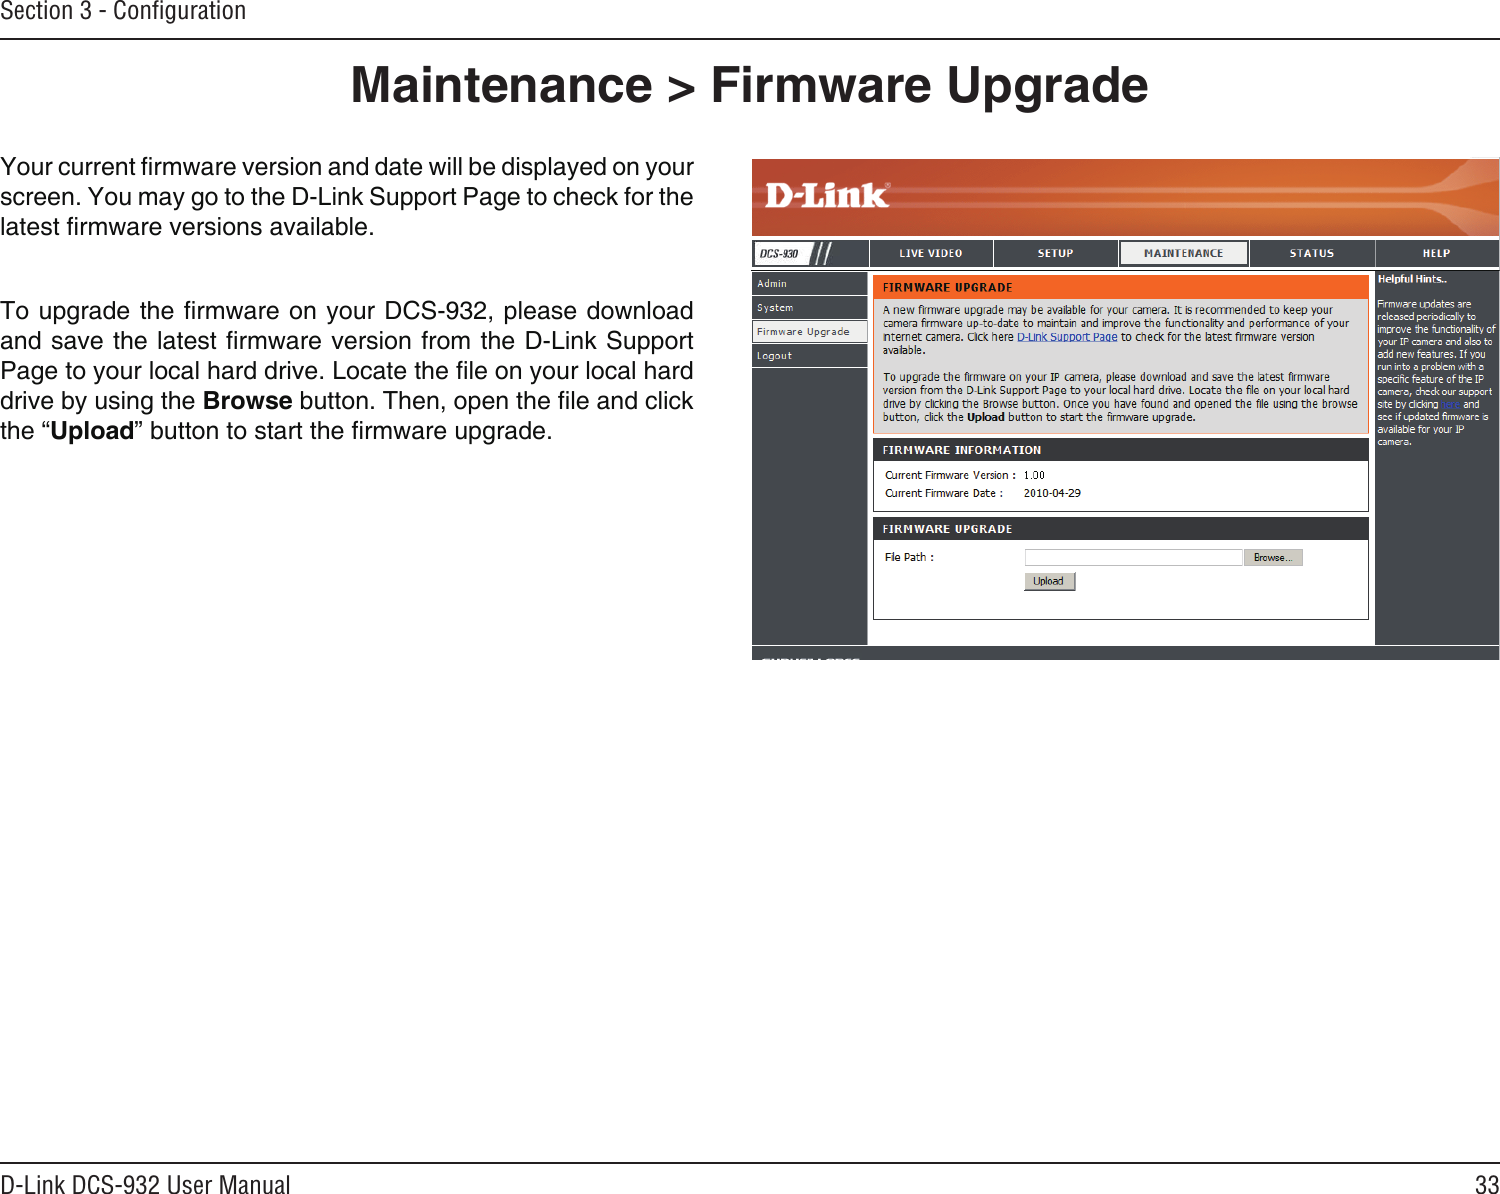 33D-Link DCS-932 User ManualSection 3 - ConﬁgurationMaintenance &gt; Firmware UpgradeYour current rmware version and date will be displayed on your screen. You may go to the D-Link Support Page to check for the latest rmware versions available. To upgrade the rmware on your DCS-932, please download and save the latest rmware version from the D-Link Support Page to your local hard drive. Locate the le on your local hard drive by using the Browse button. Then, open the le and click the “Upload” button to start the rmware upgrade.